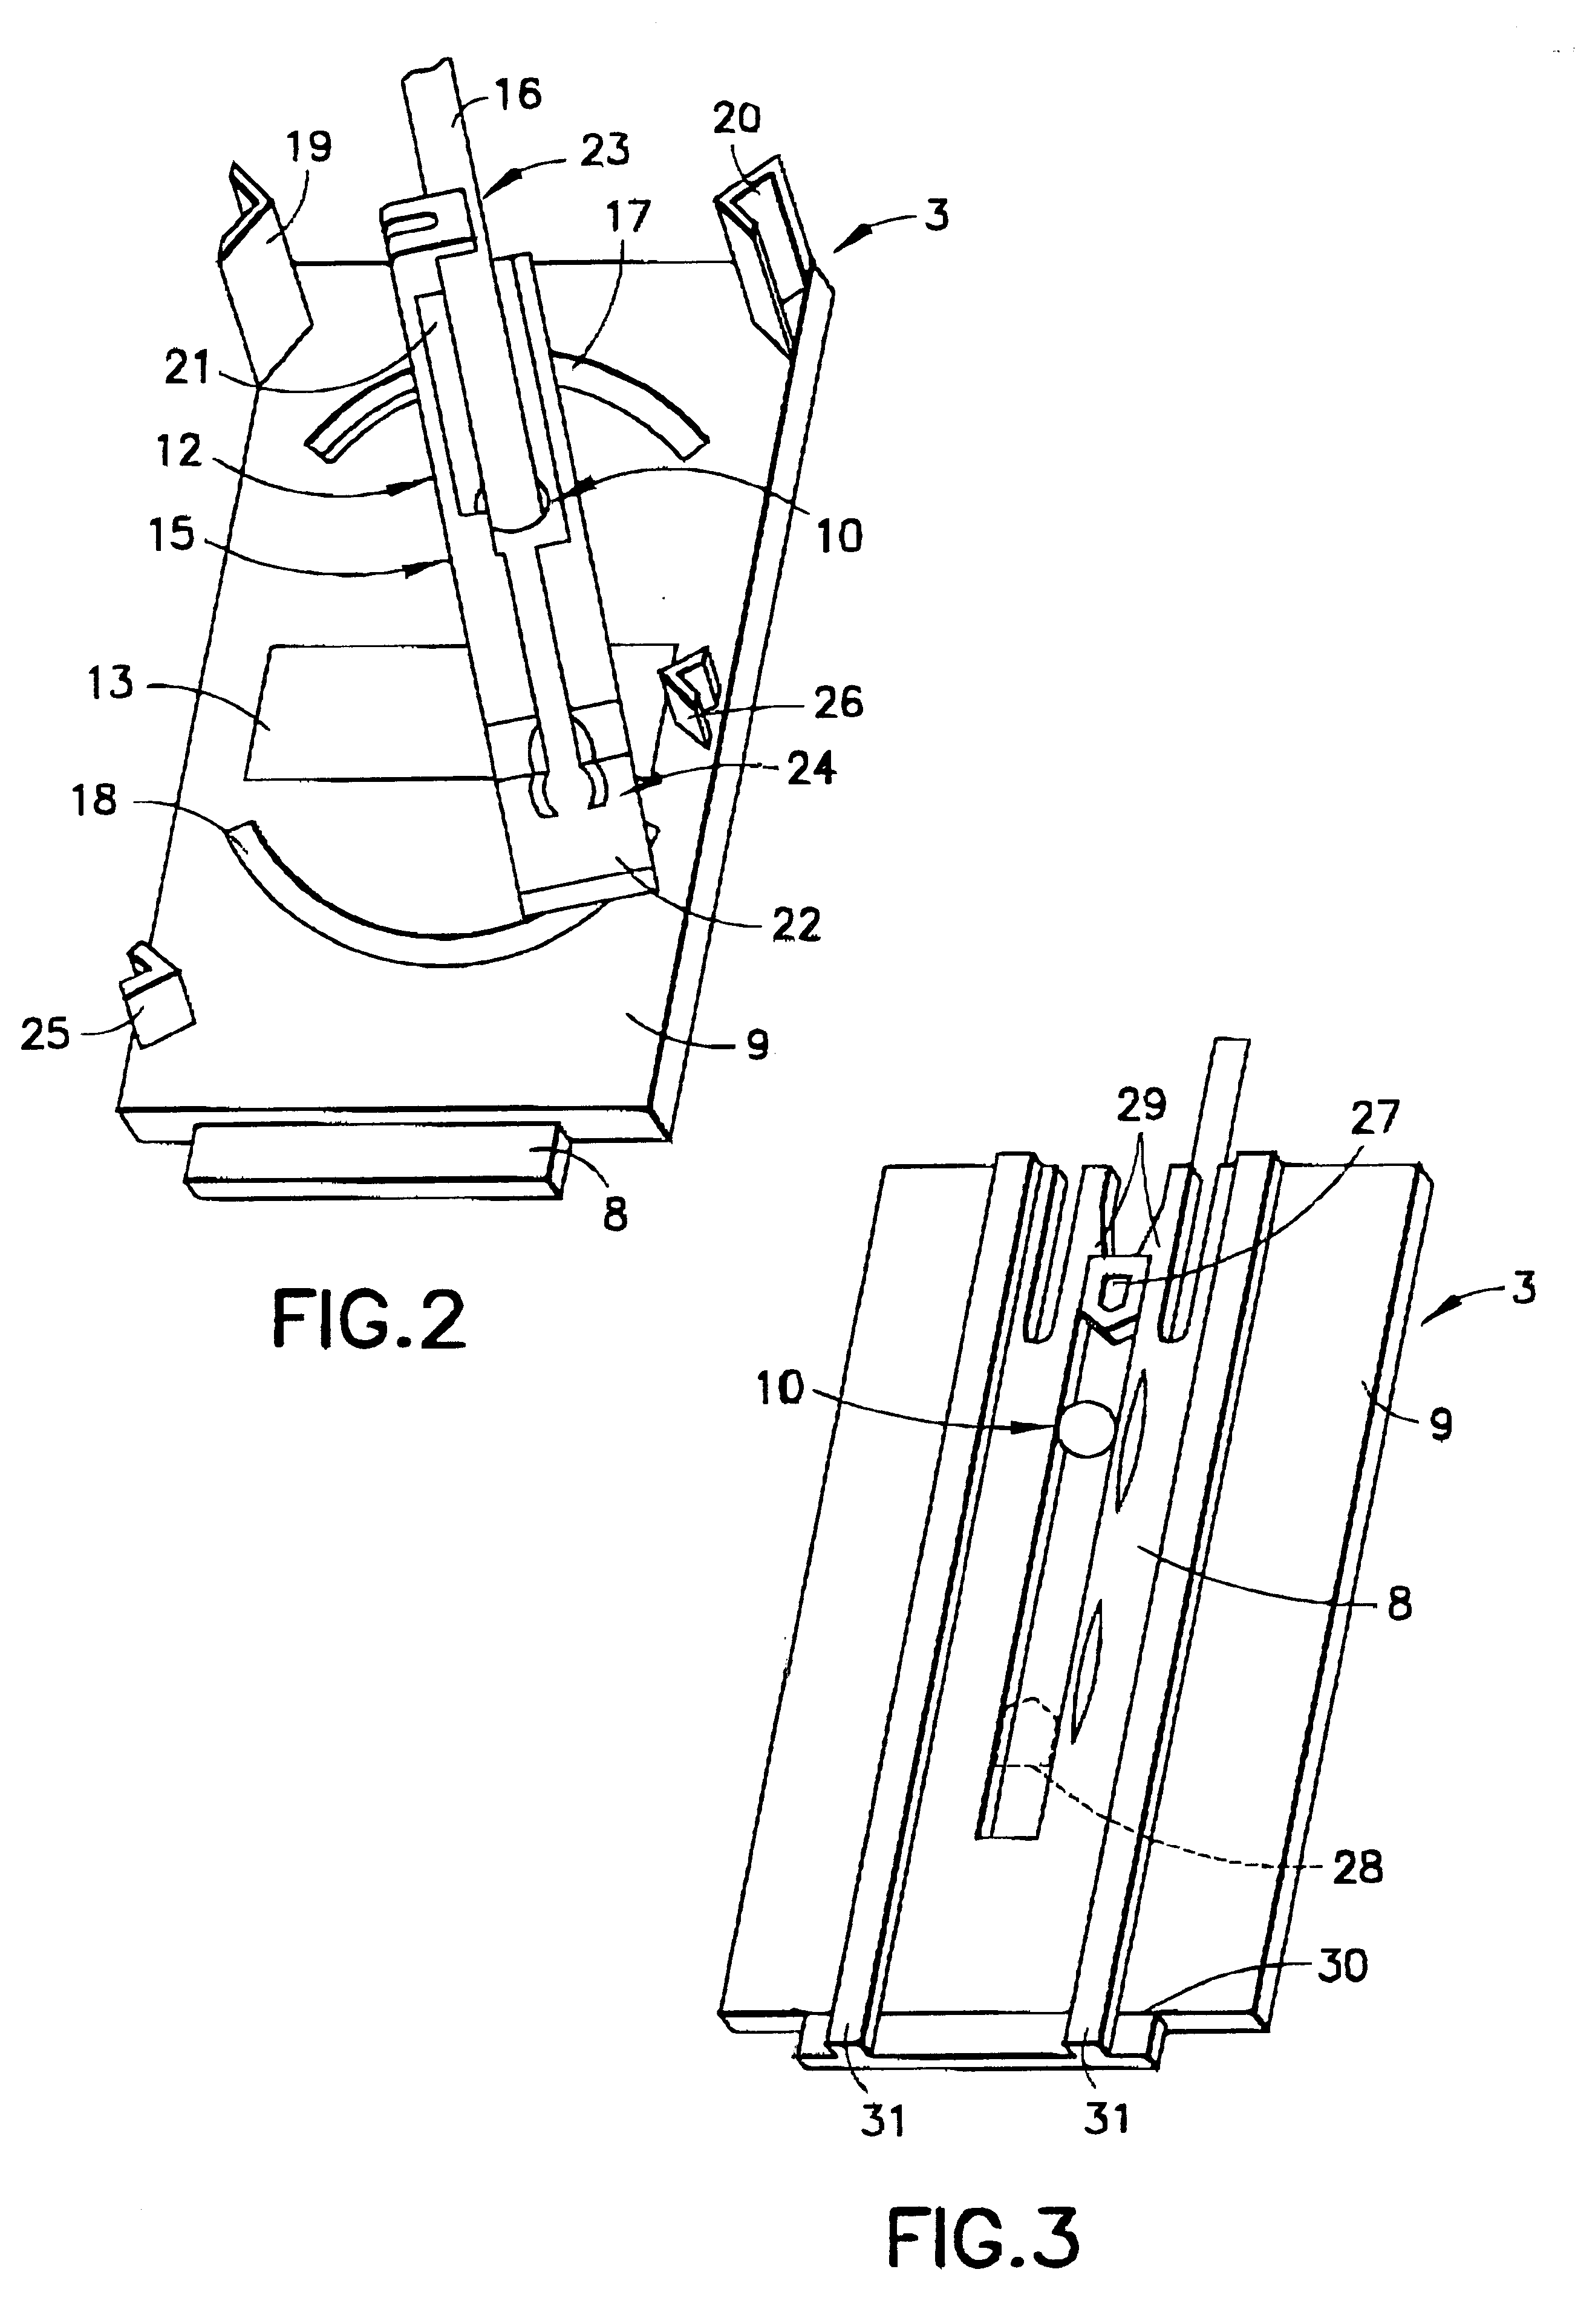 Feed device intended for mounting in a fuel tank